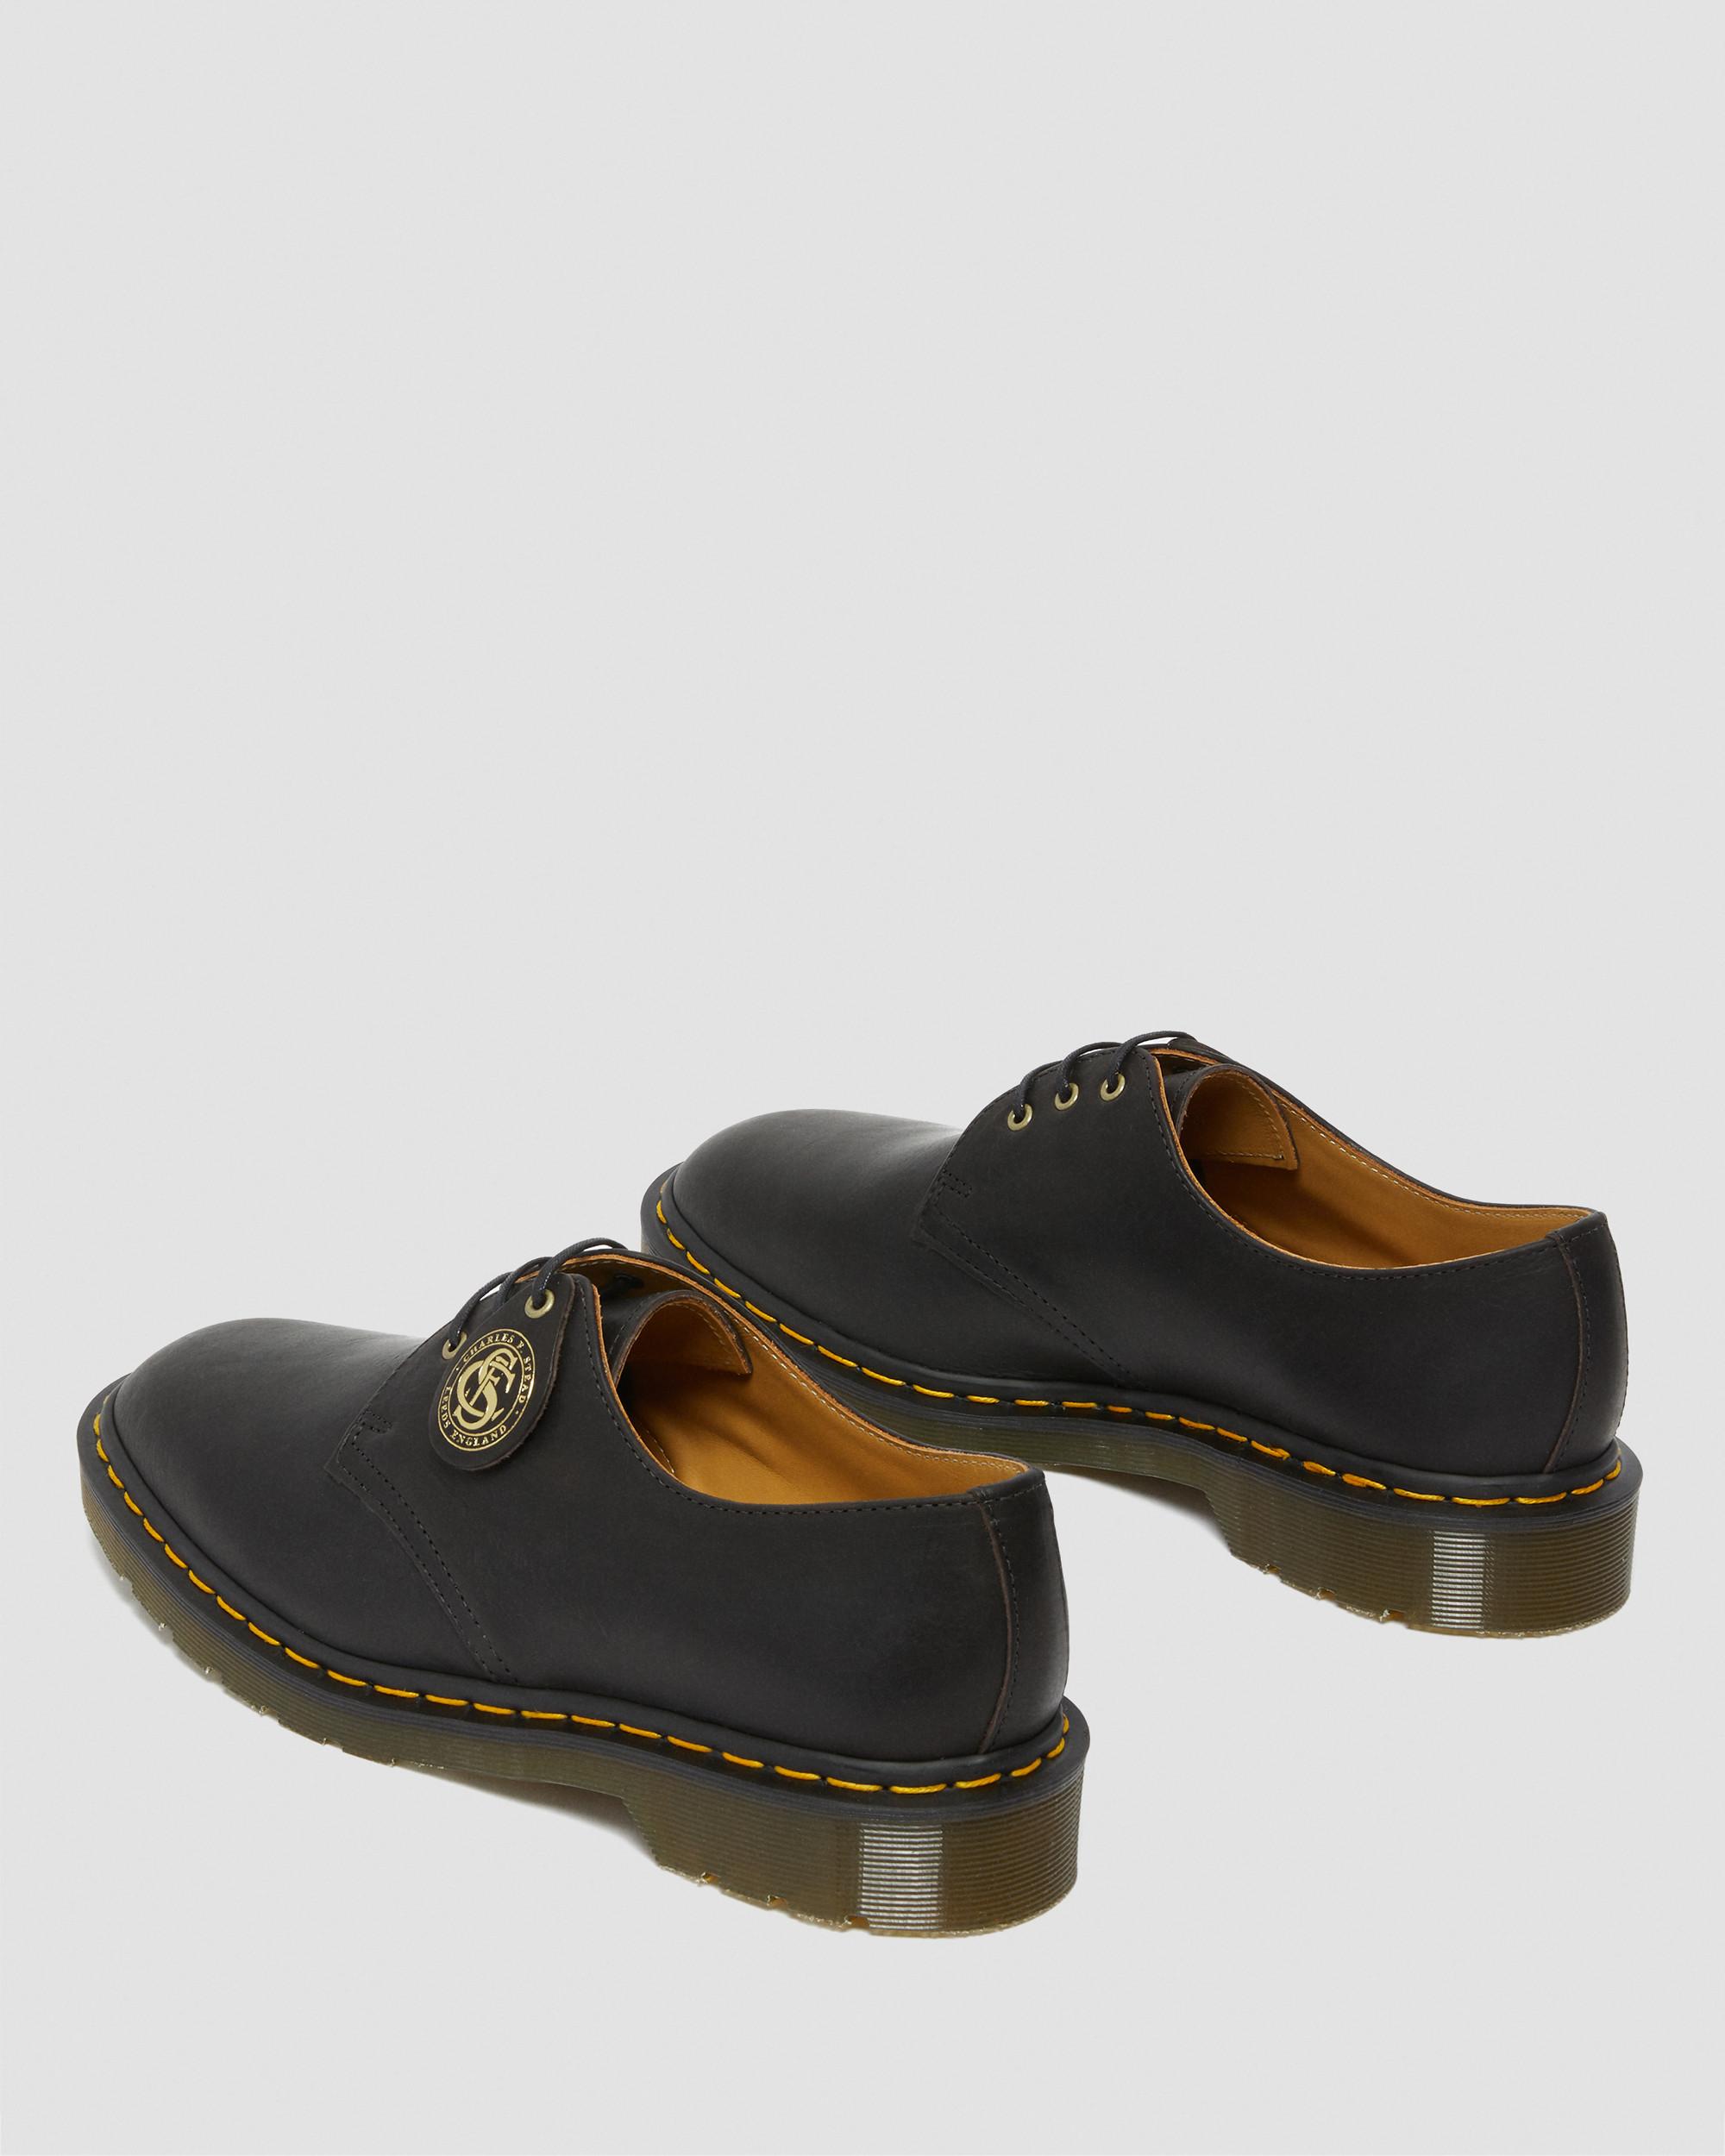 1461 Made in England Classic Oil Leather Oxford Shoes | Dr. Martens